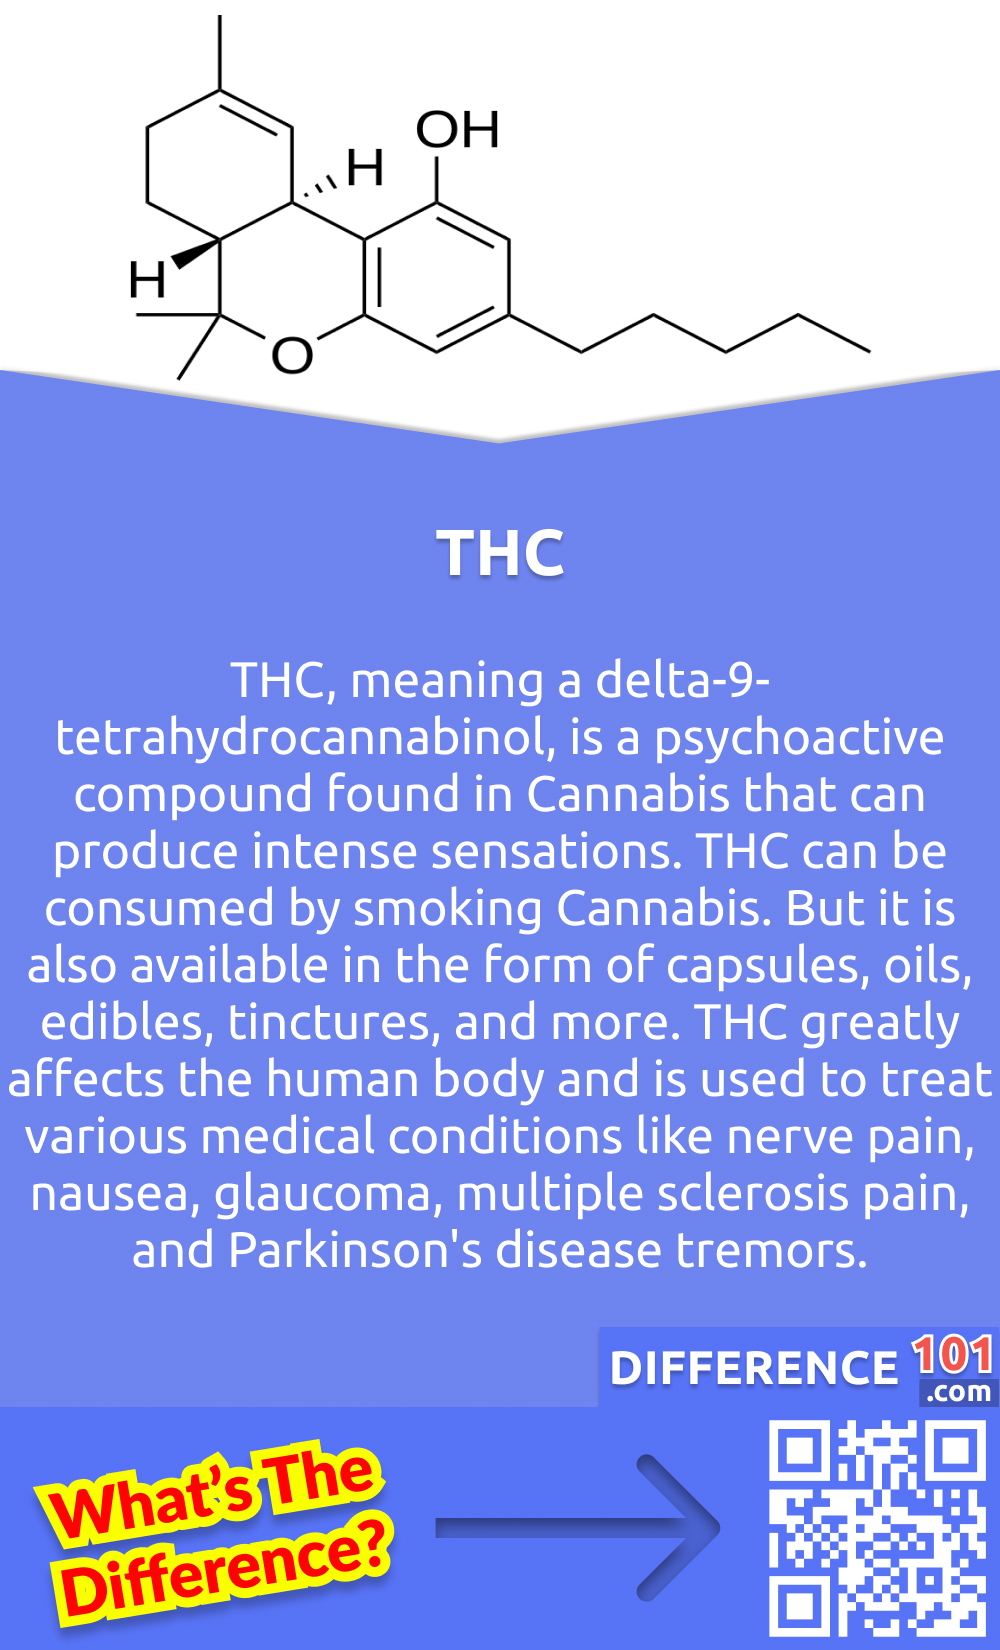 What is THC? THC, meaning a delta-9-tetrahydrocannabinol, is a psychoactive compound found in Cannabis that can produce intense sensations. THC can be consumed by smoking Cannabis. But it is also available in the form of capsules, oils, edibles, tinctures, and more. THC greatly affects the human body and is used to treat various medical conditions like nerve pain, nausea, glaucoma, multiple sclerosis pain, and Parkinson's disease tremors. THC is legal in some states and used as medical marijuana, but laws are changing all the time. Some states have marijuana with THC legal for personal use while it is illegal under U.S law.